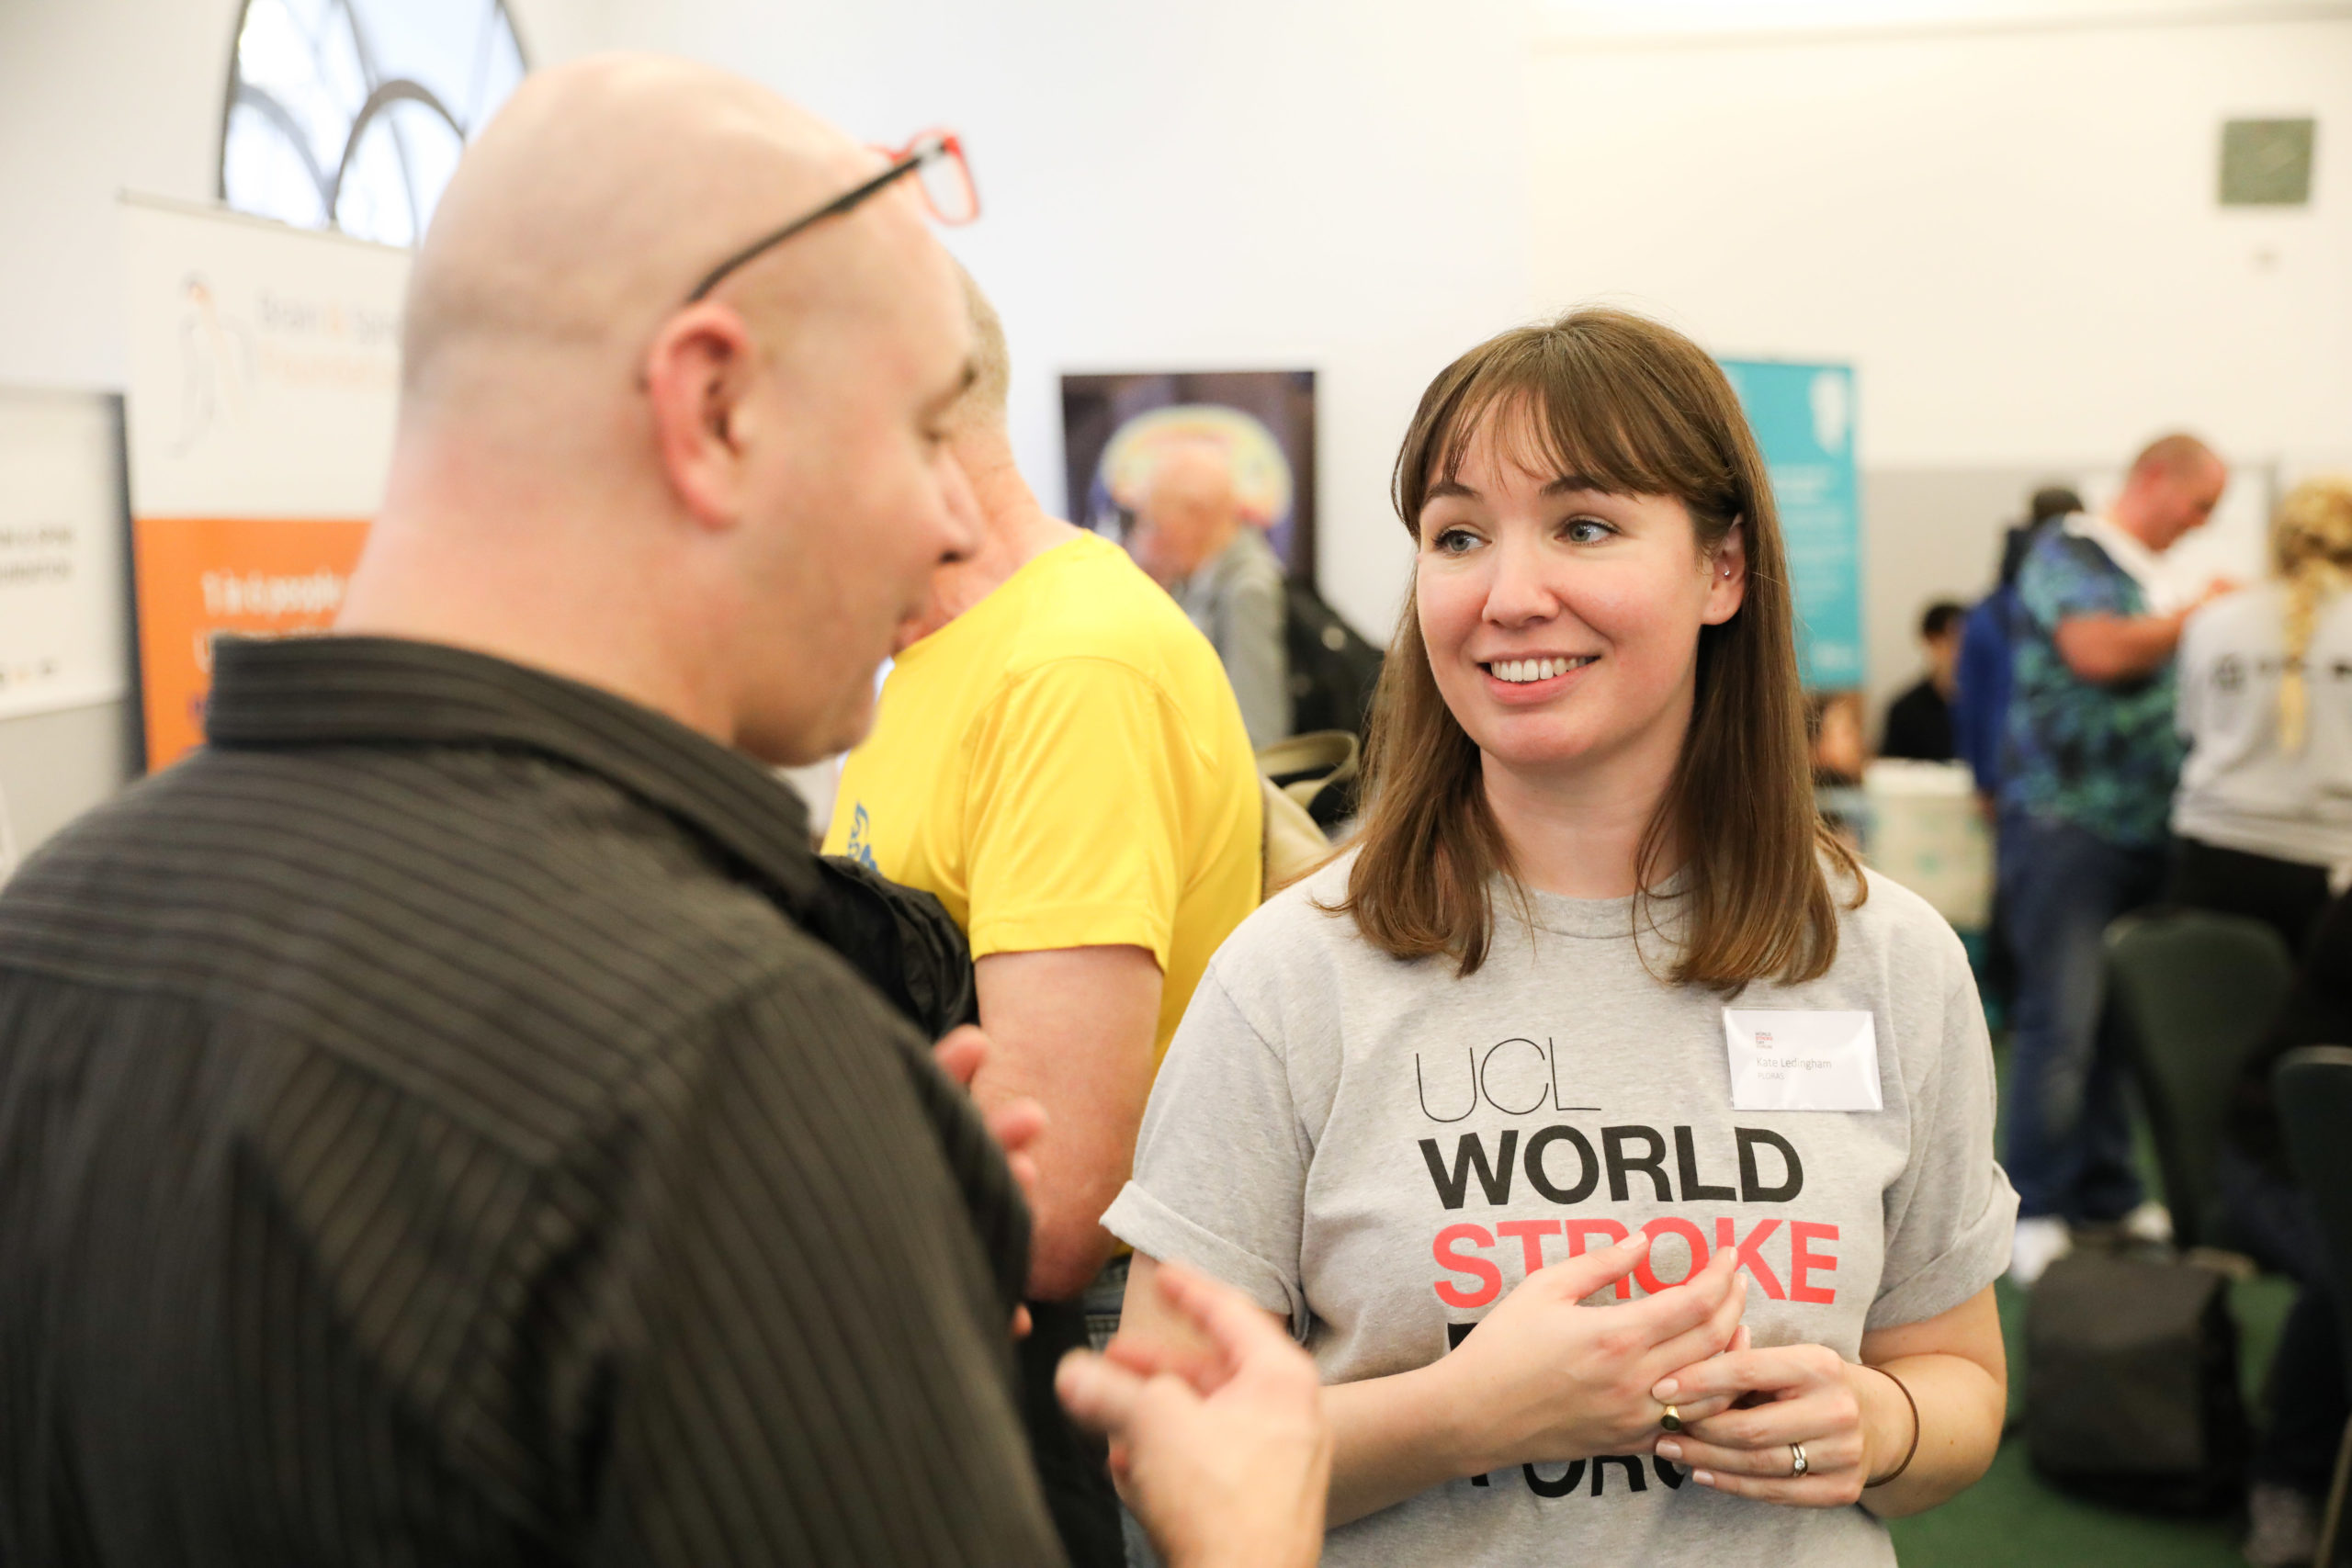 UCL World Stroke Day Forum Returns in October 2022